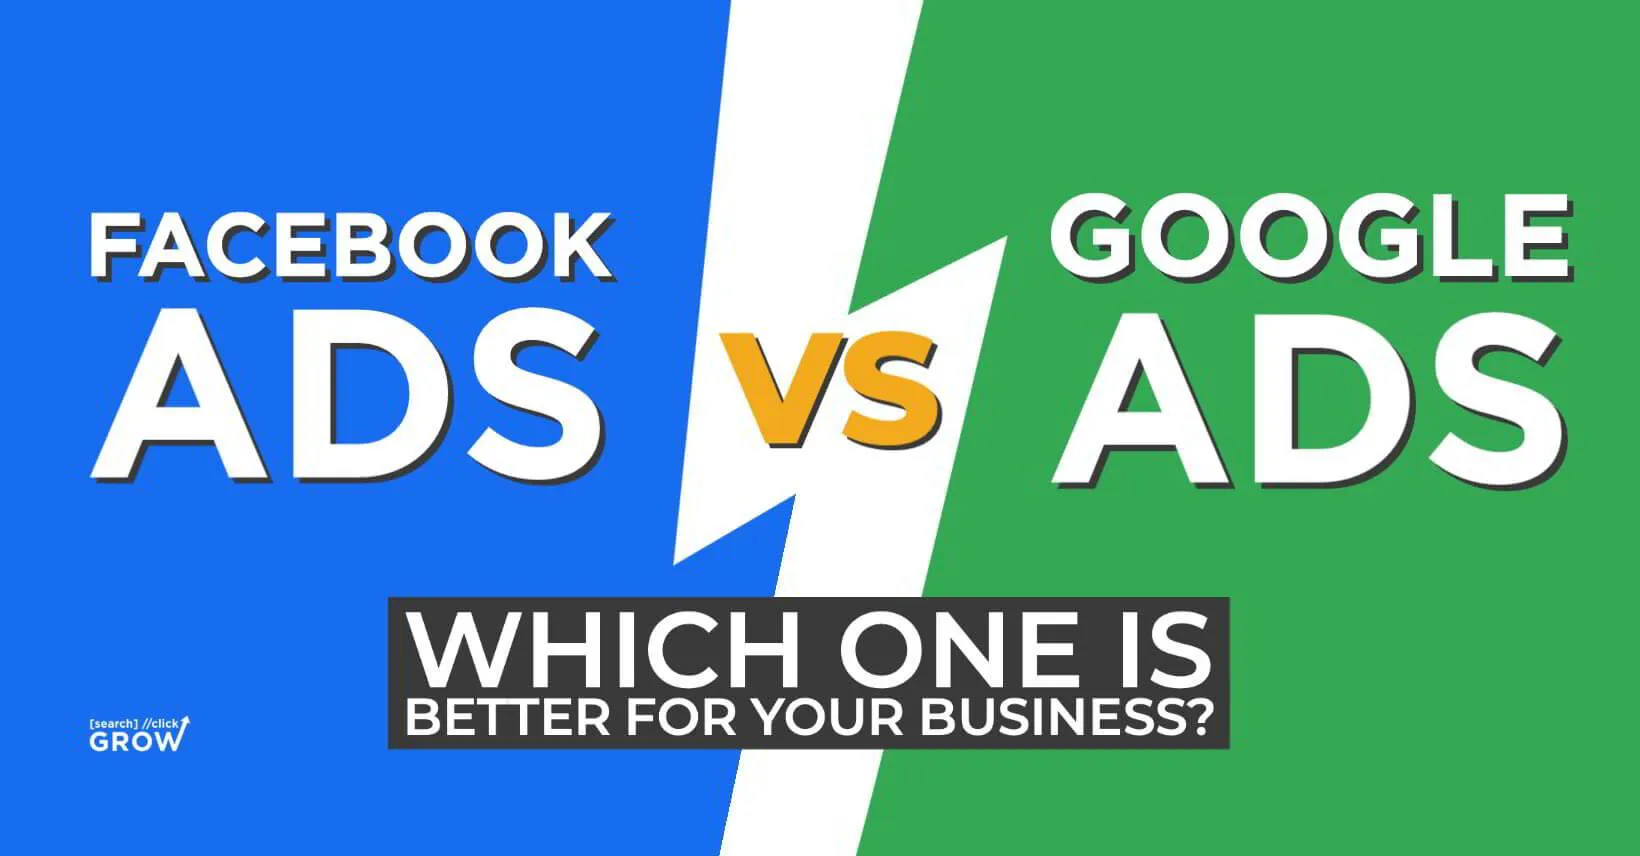 Facebook Ads vs Google Ads: Which Is Better for Your Business?